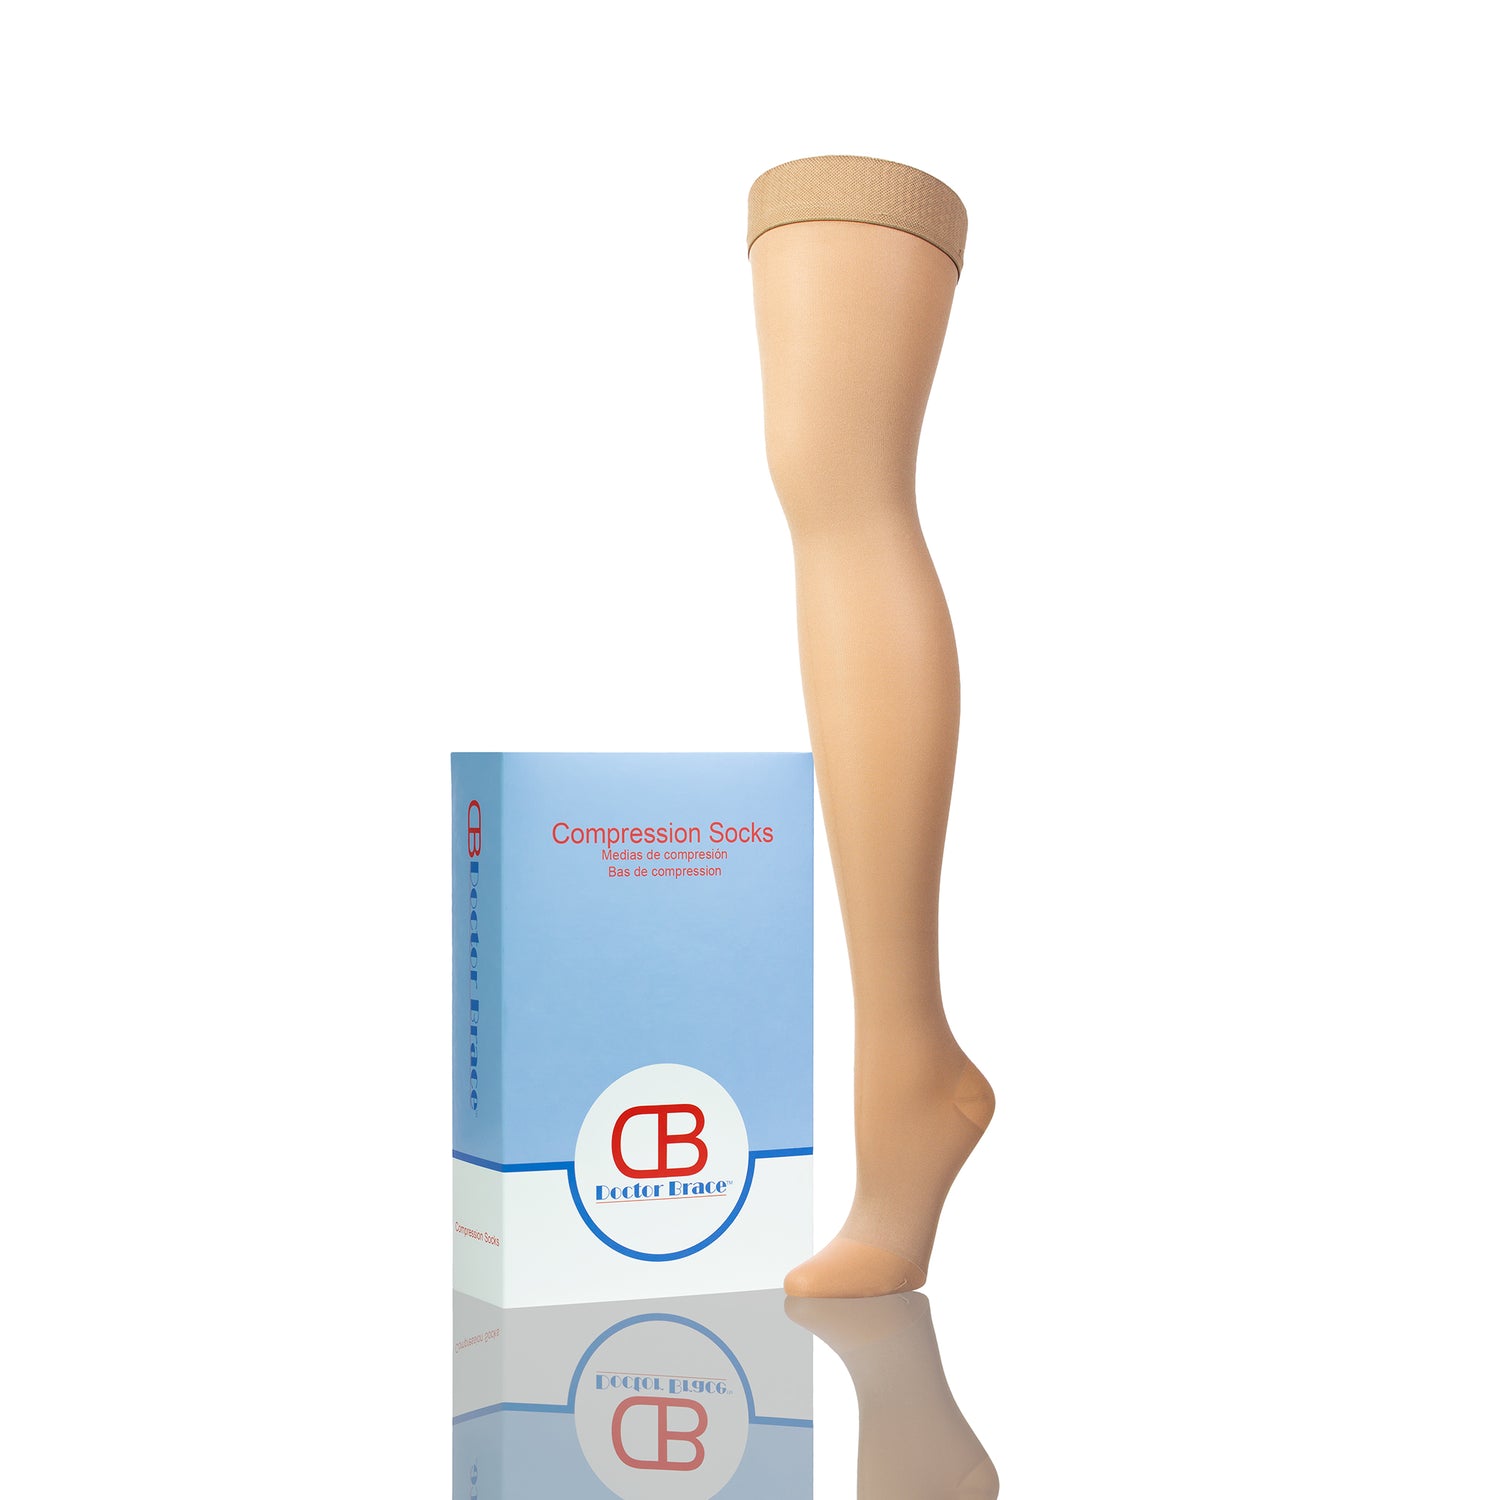 Thigh High Medical Compression Stockings 23-30mmHg for Varicose